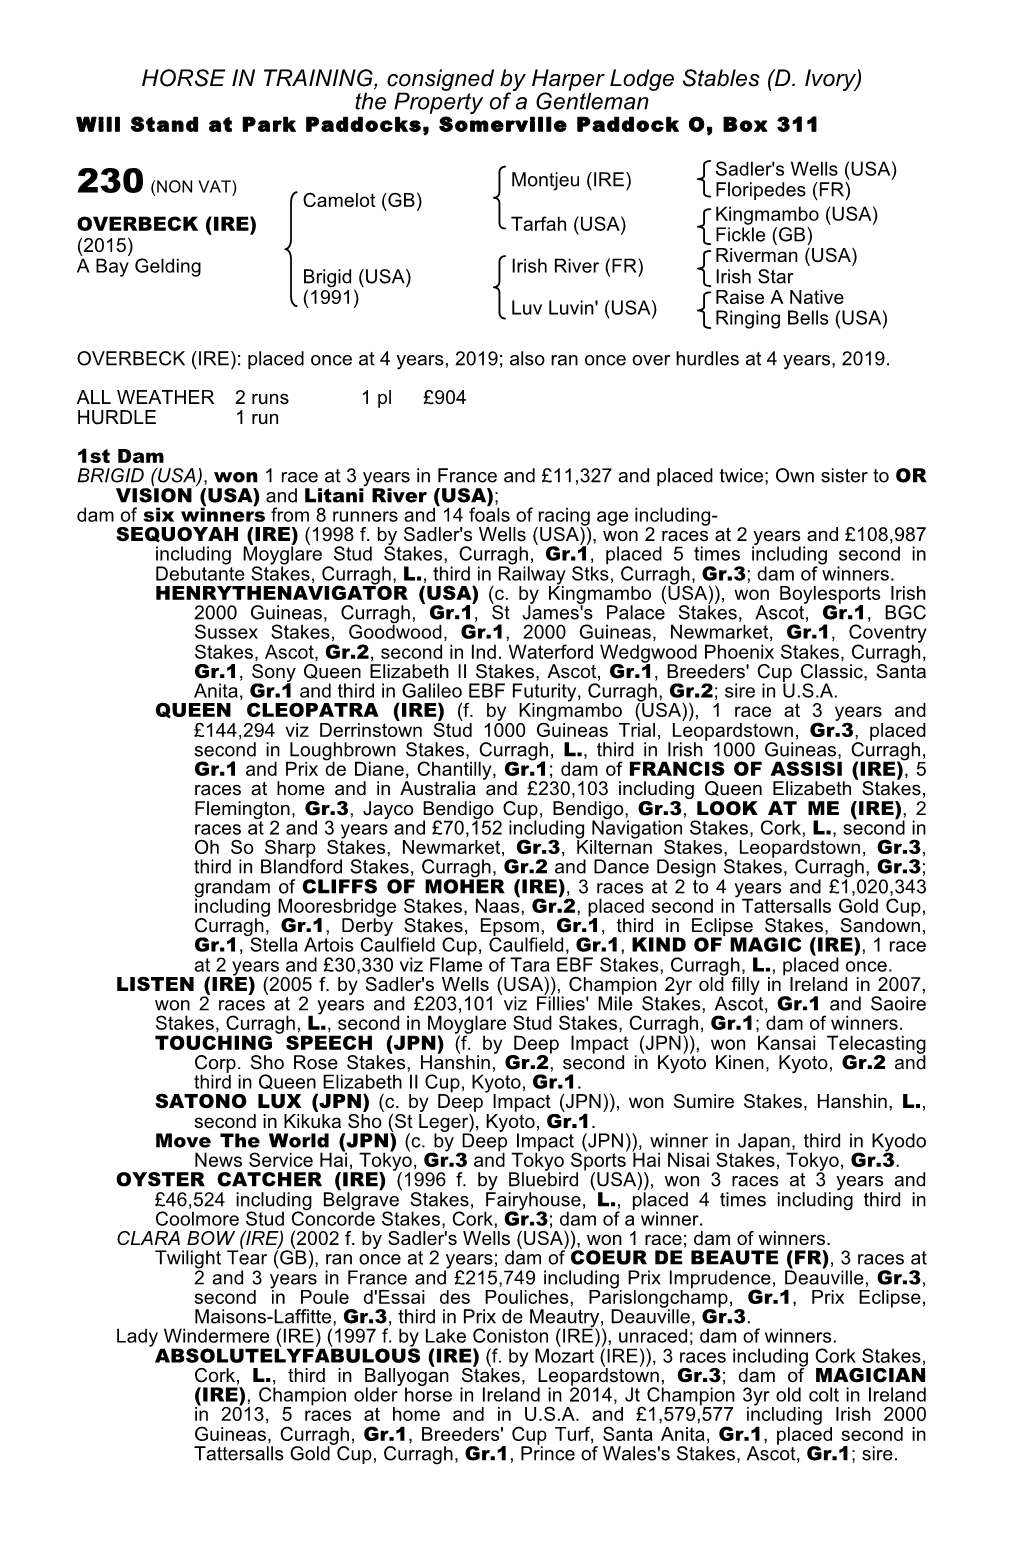 HORSE in TRAINING, Consigned by Harper Lodge Stables (D. Ivory) the Property of a Gentleman Will Stand at Park Paddocks, Somerville Paddock O, Box 311